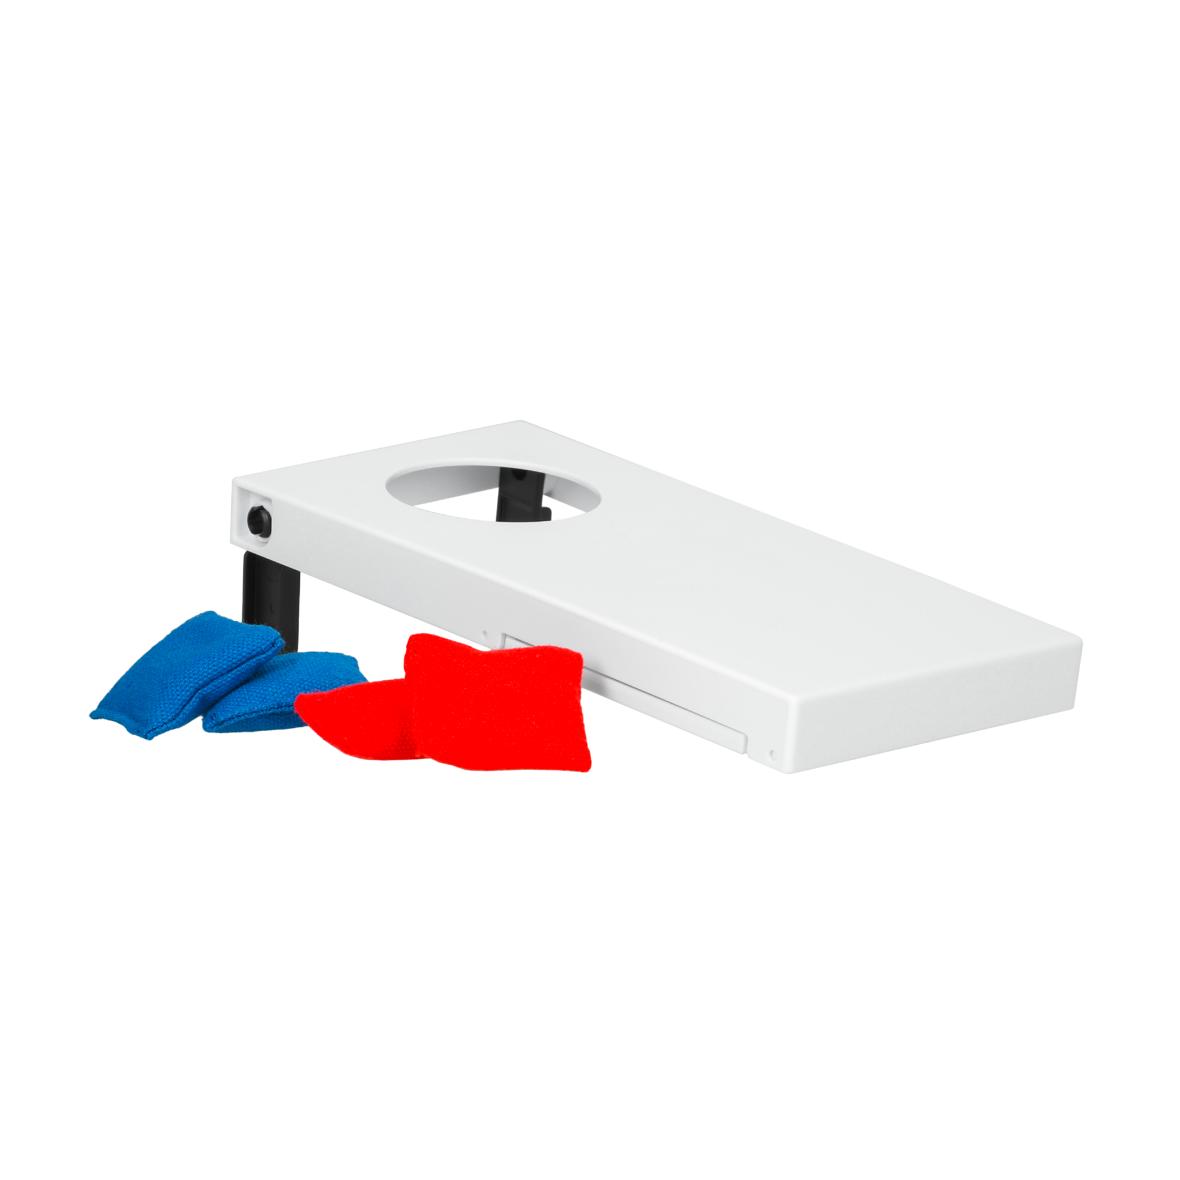 A compact game set for playing cornhole - Maidenhead